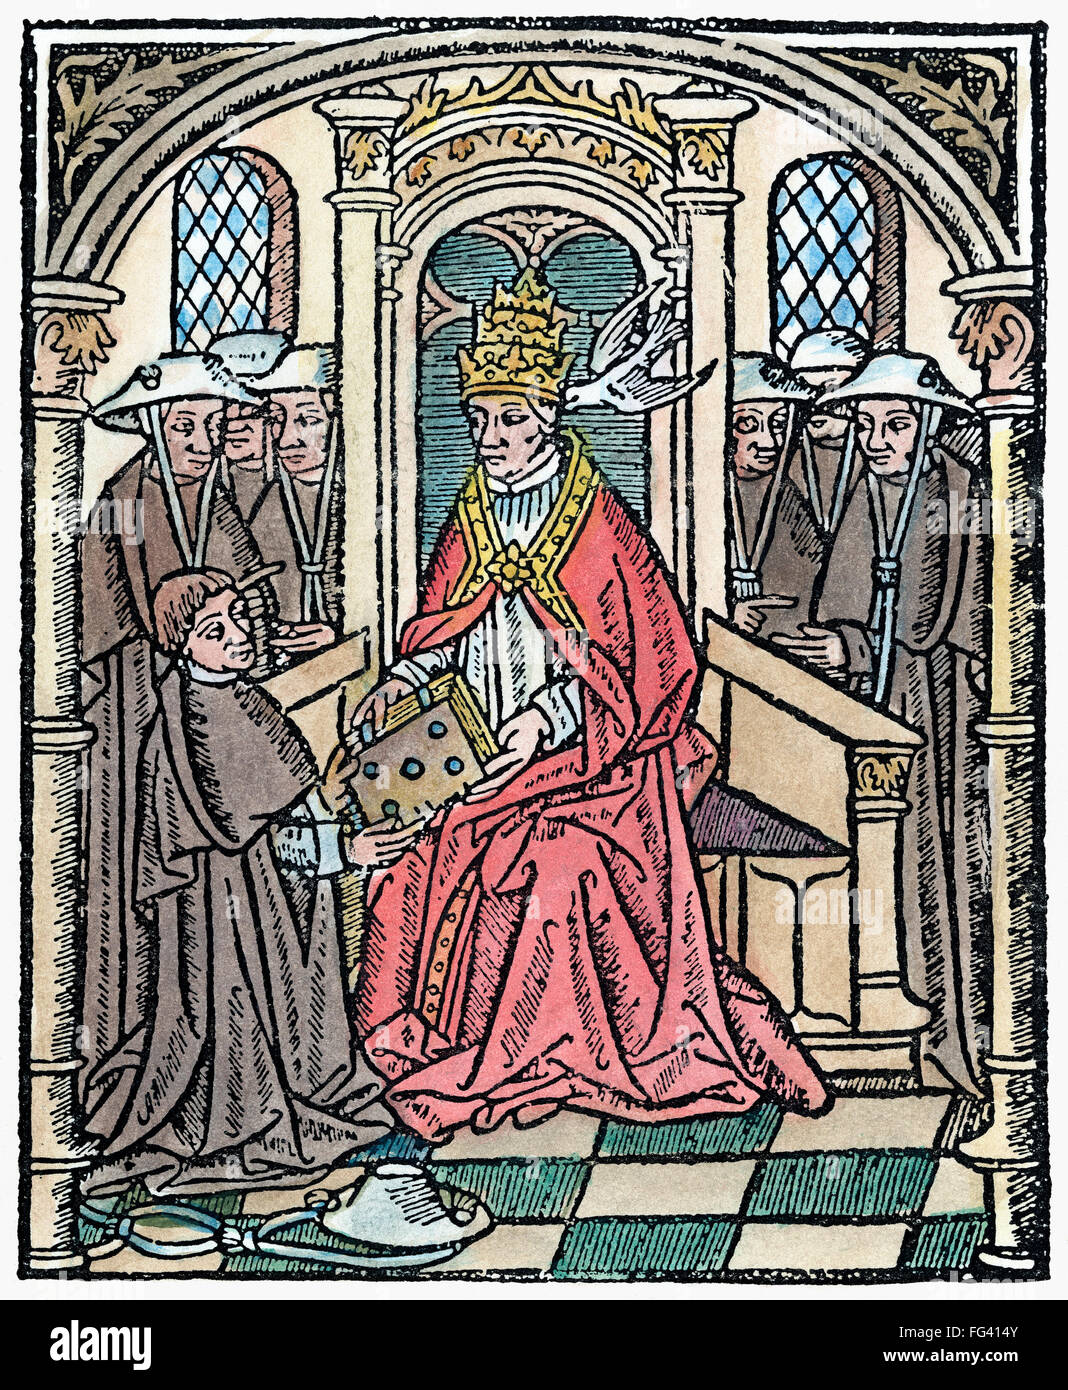 POPE GREGORY I (c540-604). /nKnown as Gregory the Great. Pope, 590-604. Gregory receiving a book from a cardinal, as the Holy Spirit whispers into his ear. Metalcut, French, 16th century. Stock Photo